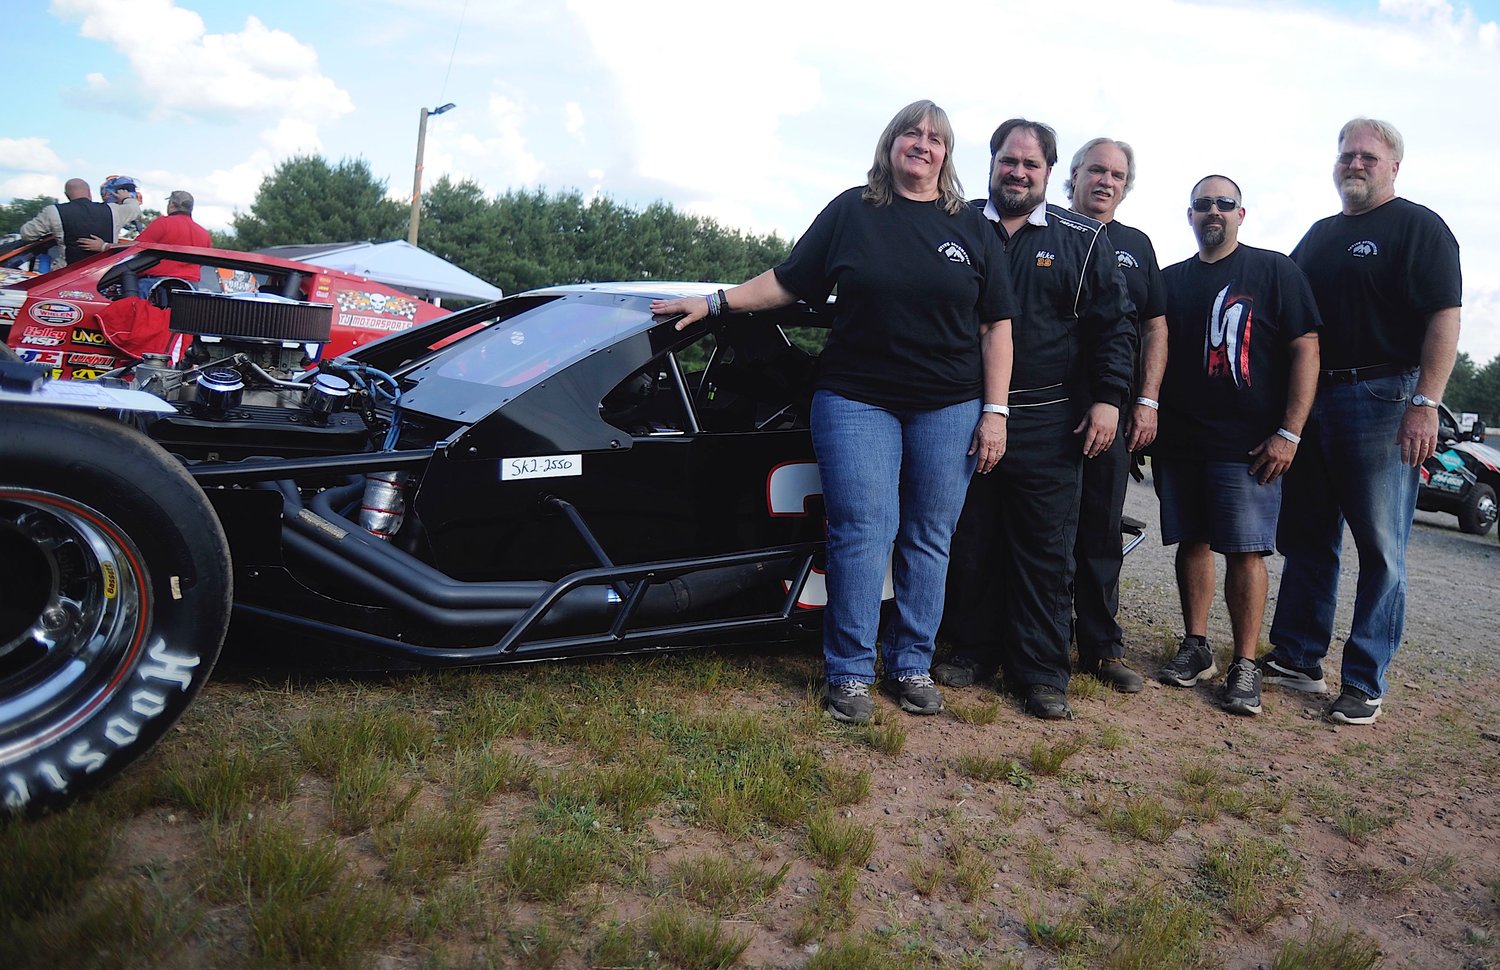 The race team: Mary Dutka, mother, left; Mike Dutka, racecar driver; John Dutka, father and crew chief; John Dutka Jr., brother and pit crew; Ed Darrow, “the tire and gas guy.”